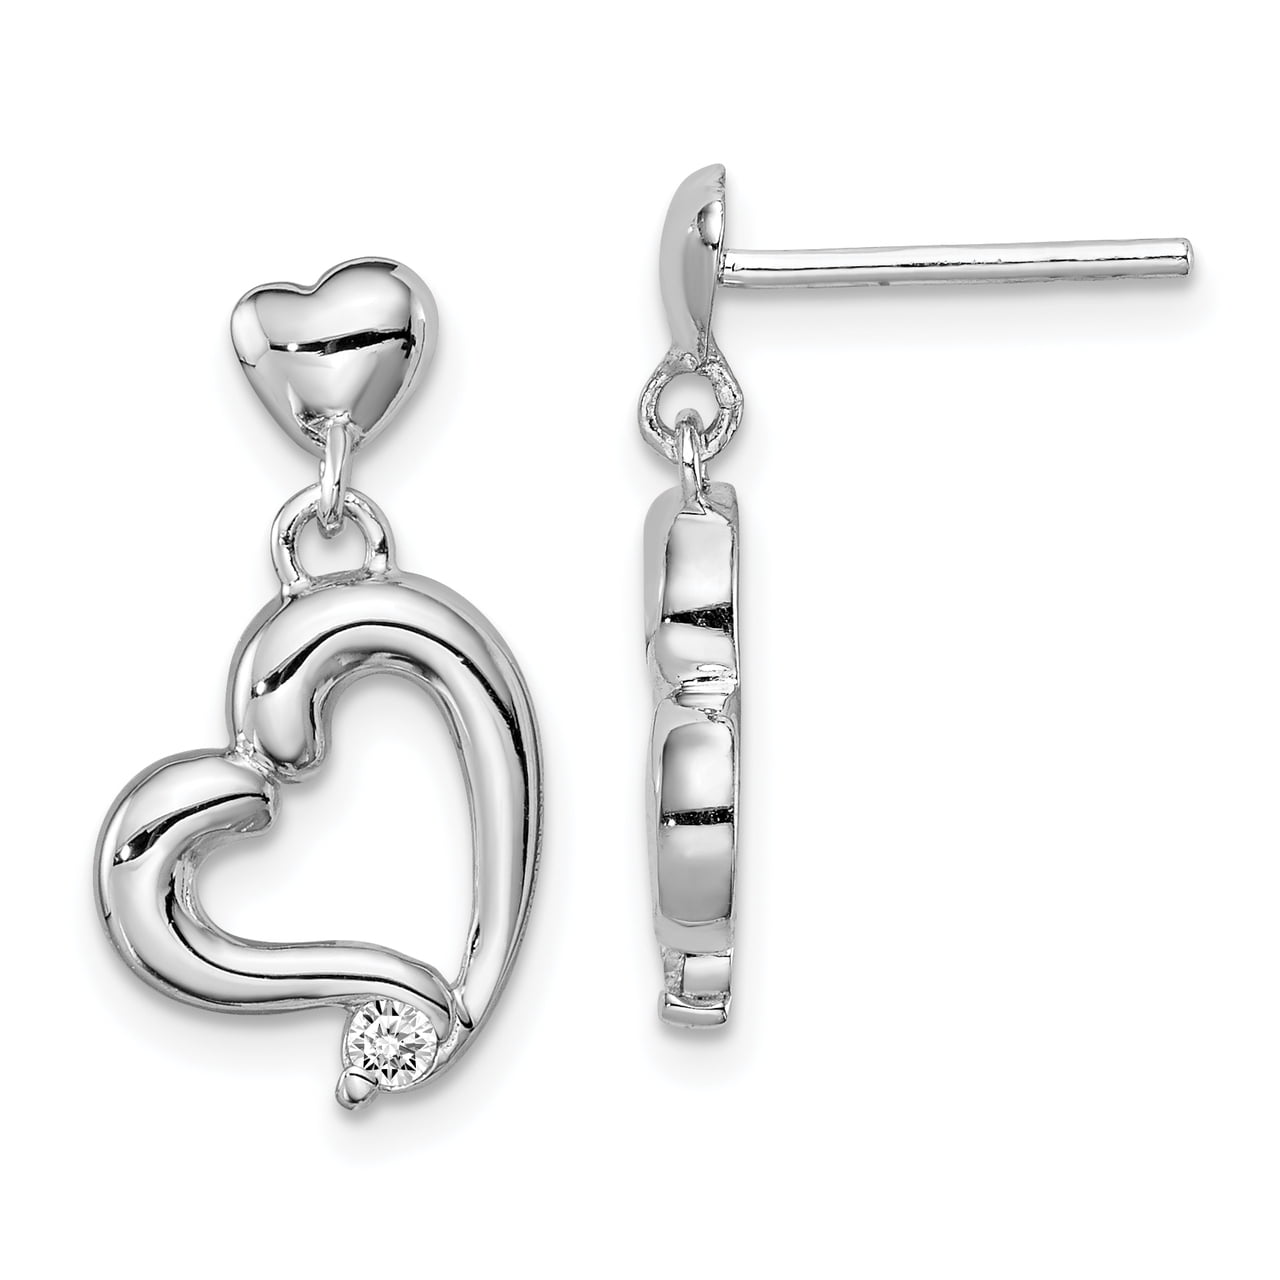 JewelsObsession Sterling Silver 20mm Bass Charm w/Lobster Clasp